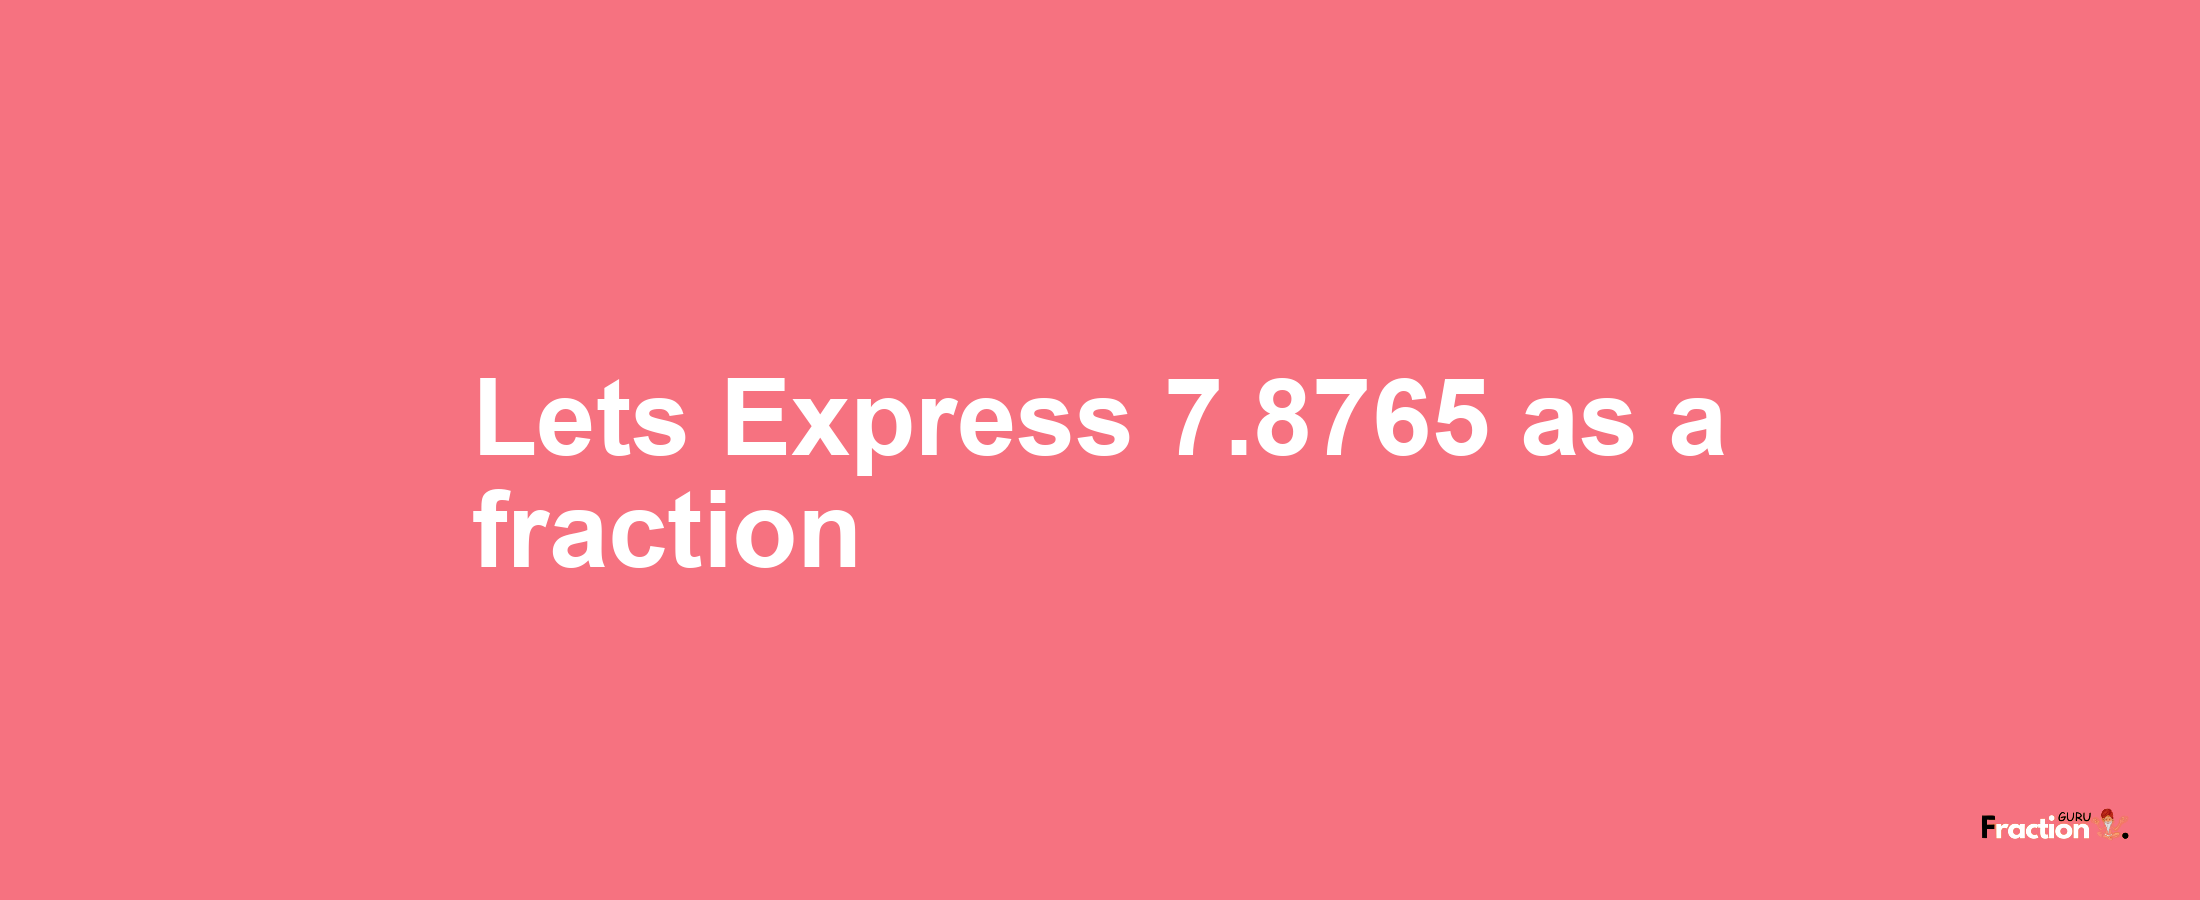 Lets Express 7.8765 as afraction